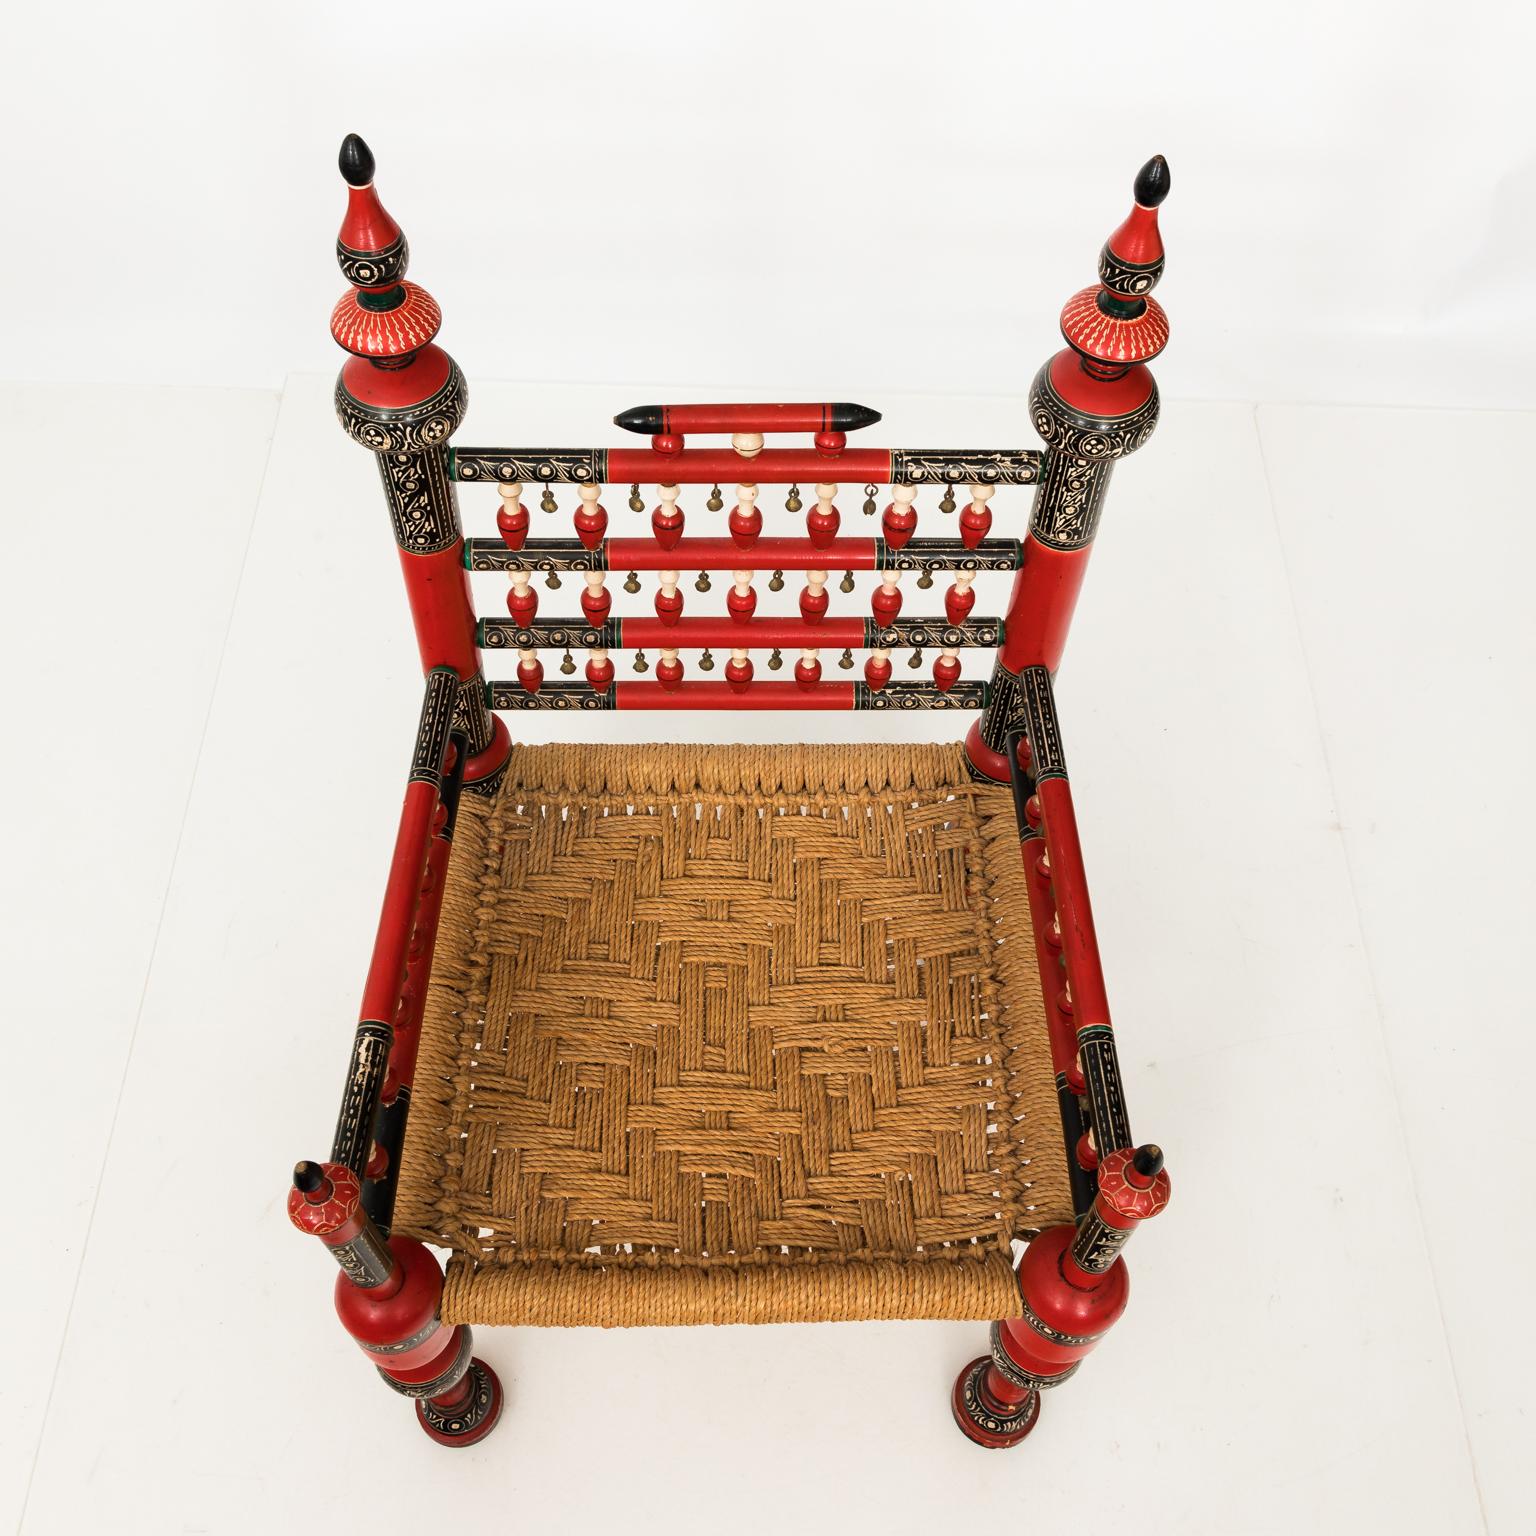 Circa mid-20th century pair of red painted Anglo-Indian style chairs with woven seats and brass bells. Turned spindles are also featured throughout.
 